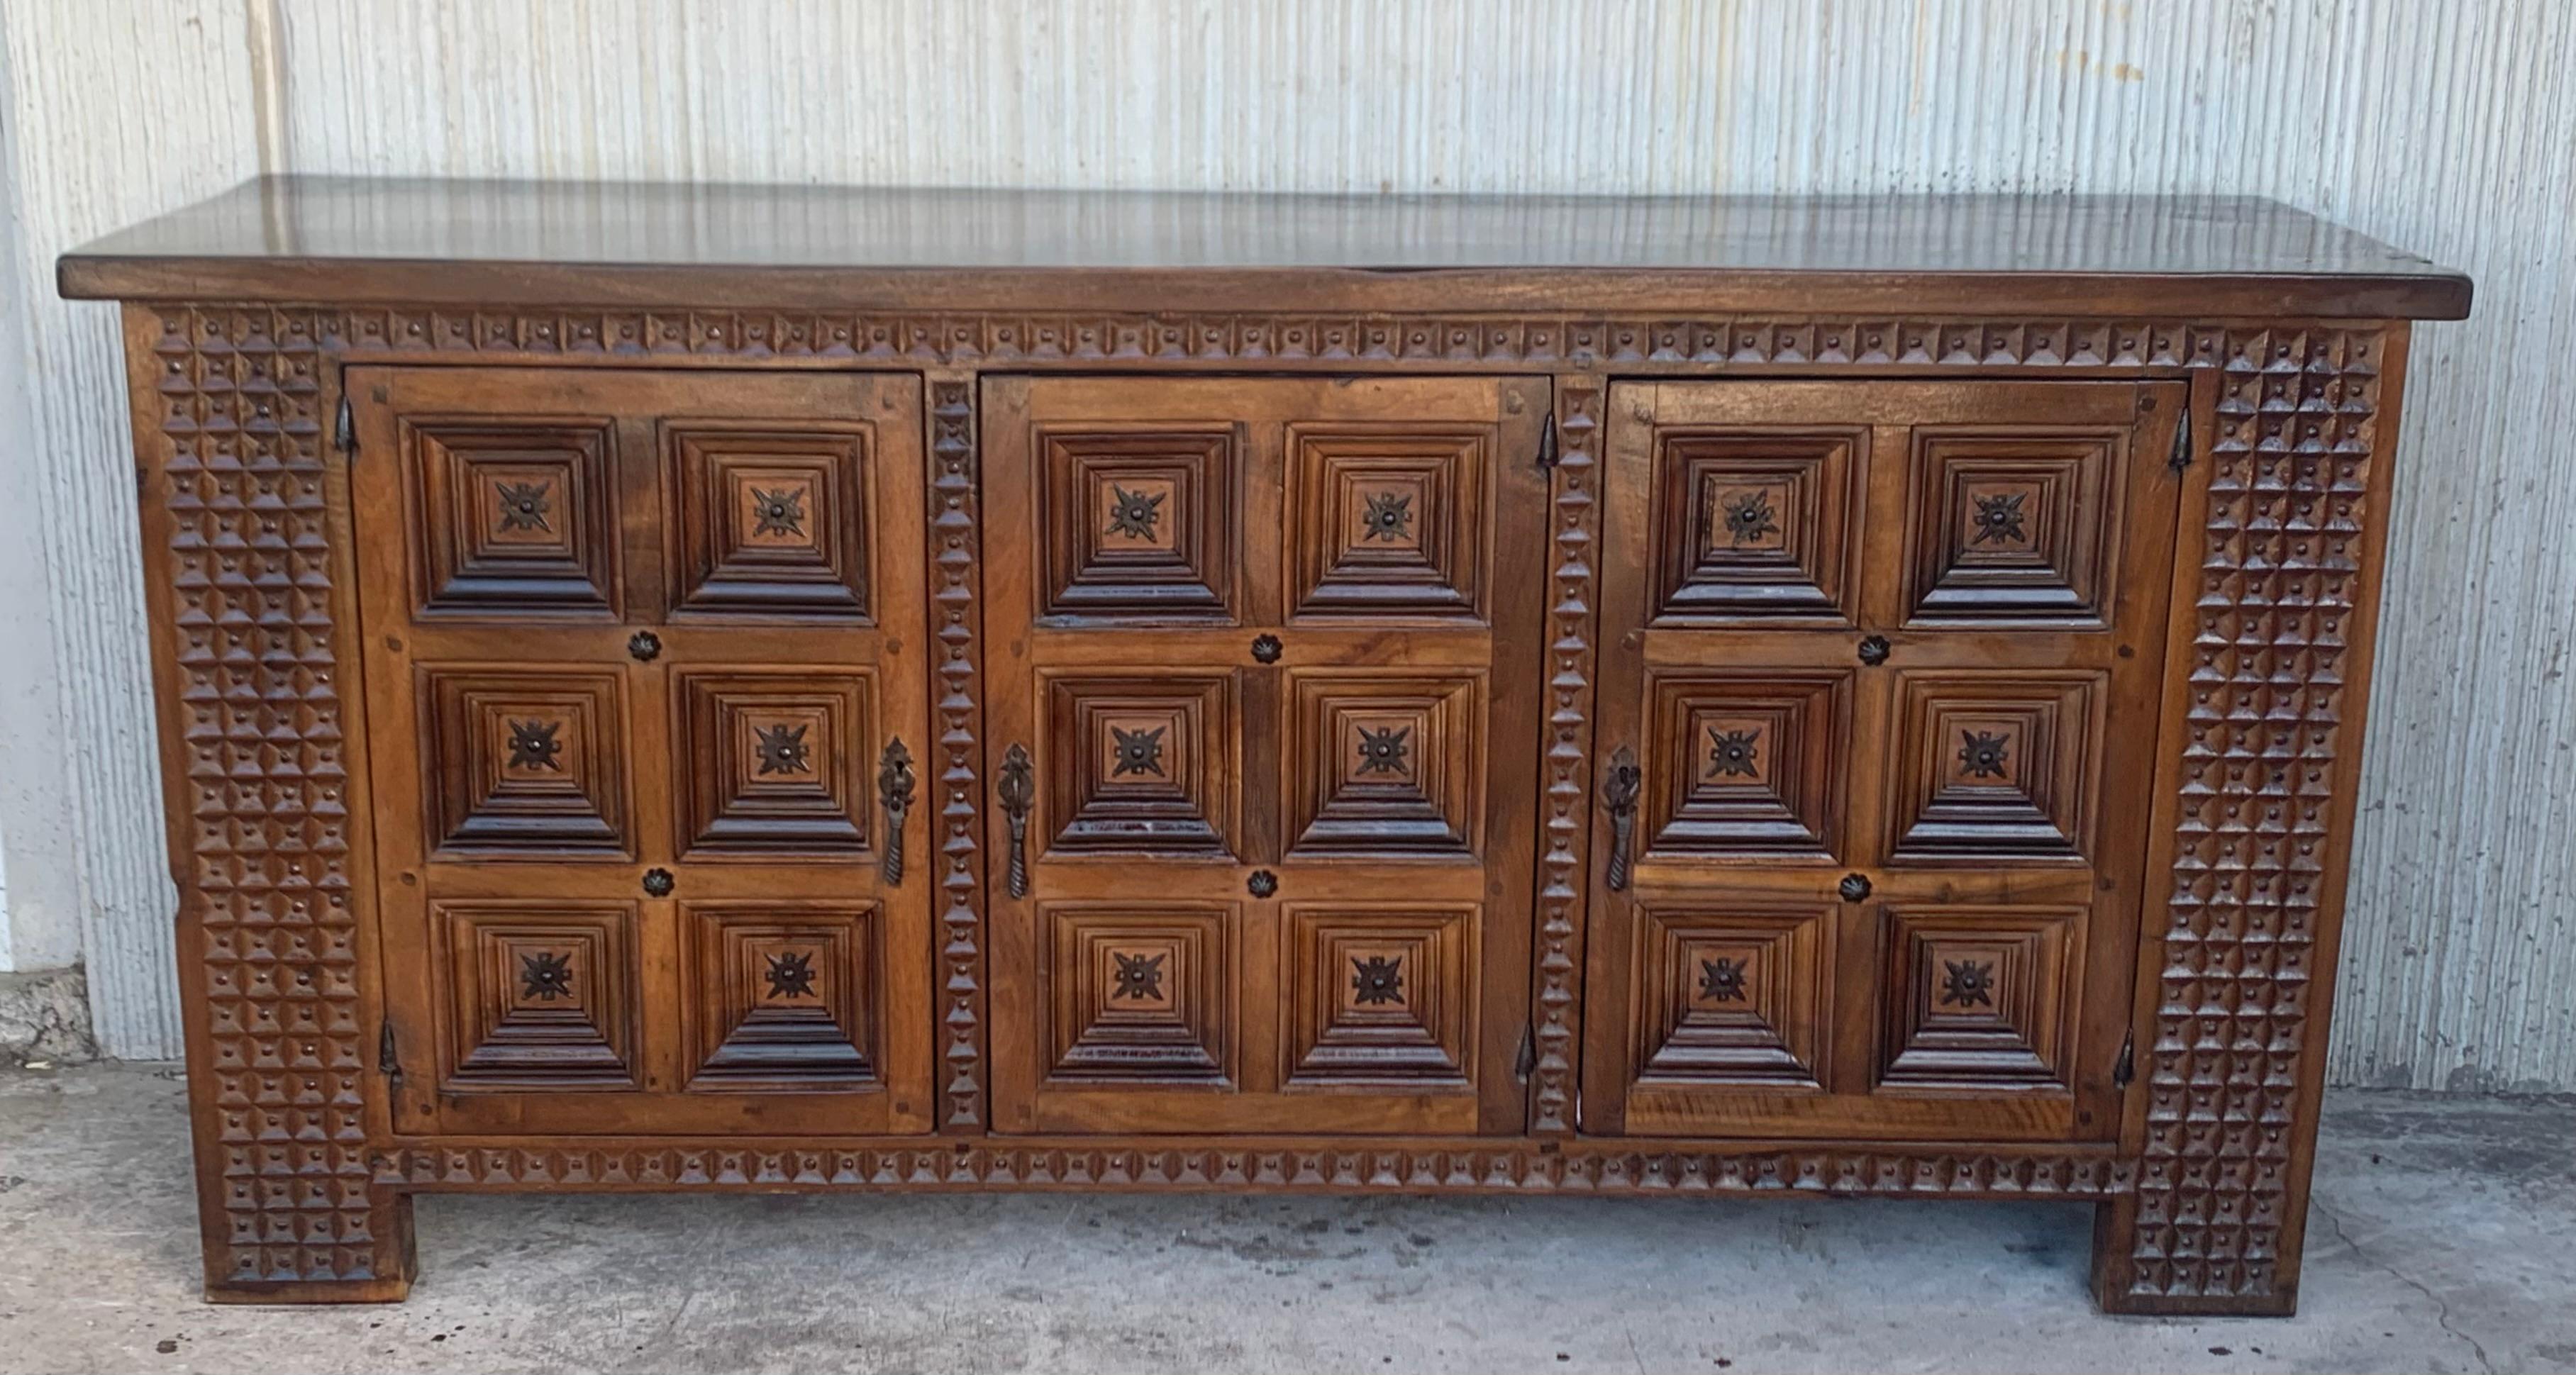 19th Century Large Spanish Gothic Carved Walnut Cabinet with Three Door In Good Condition For Sale In Miami, FL